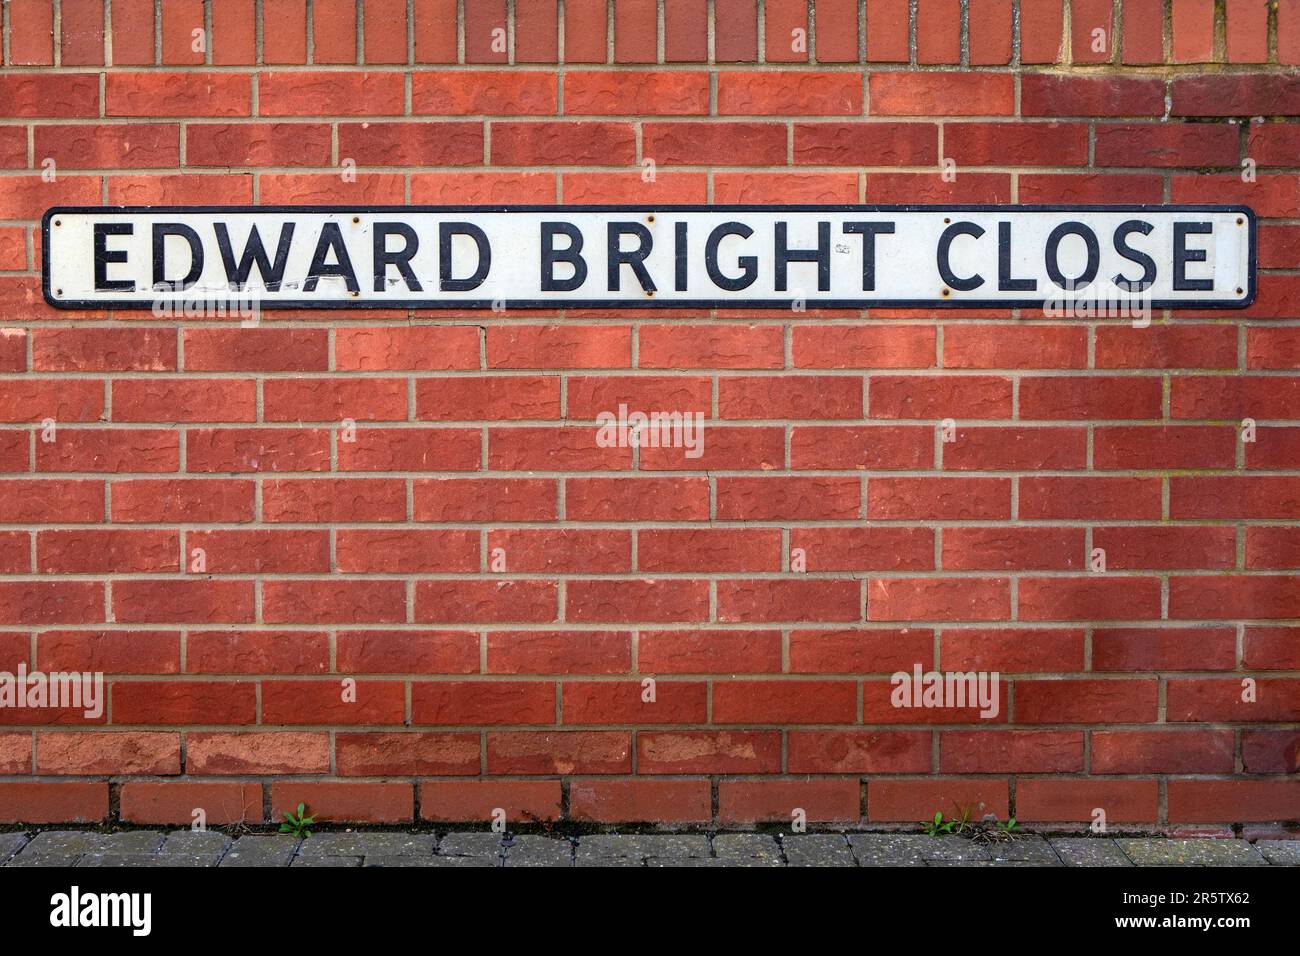 Street sign for Edward Bright Close in the town of Maldon in Essex, UK. The street is named after Edward Bright - known as the fat man of Maldon durin Stock Photo